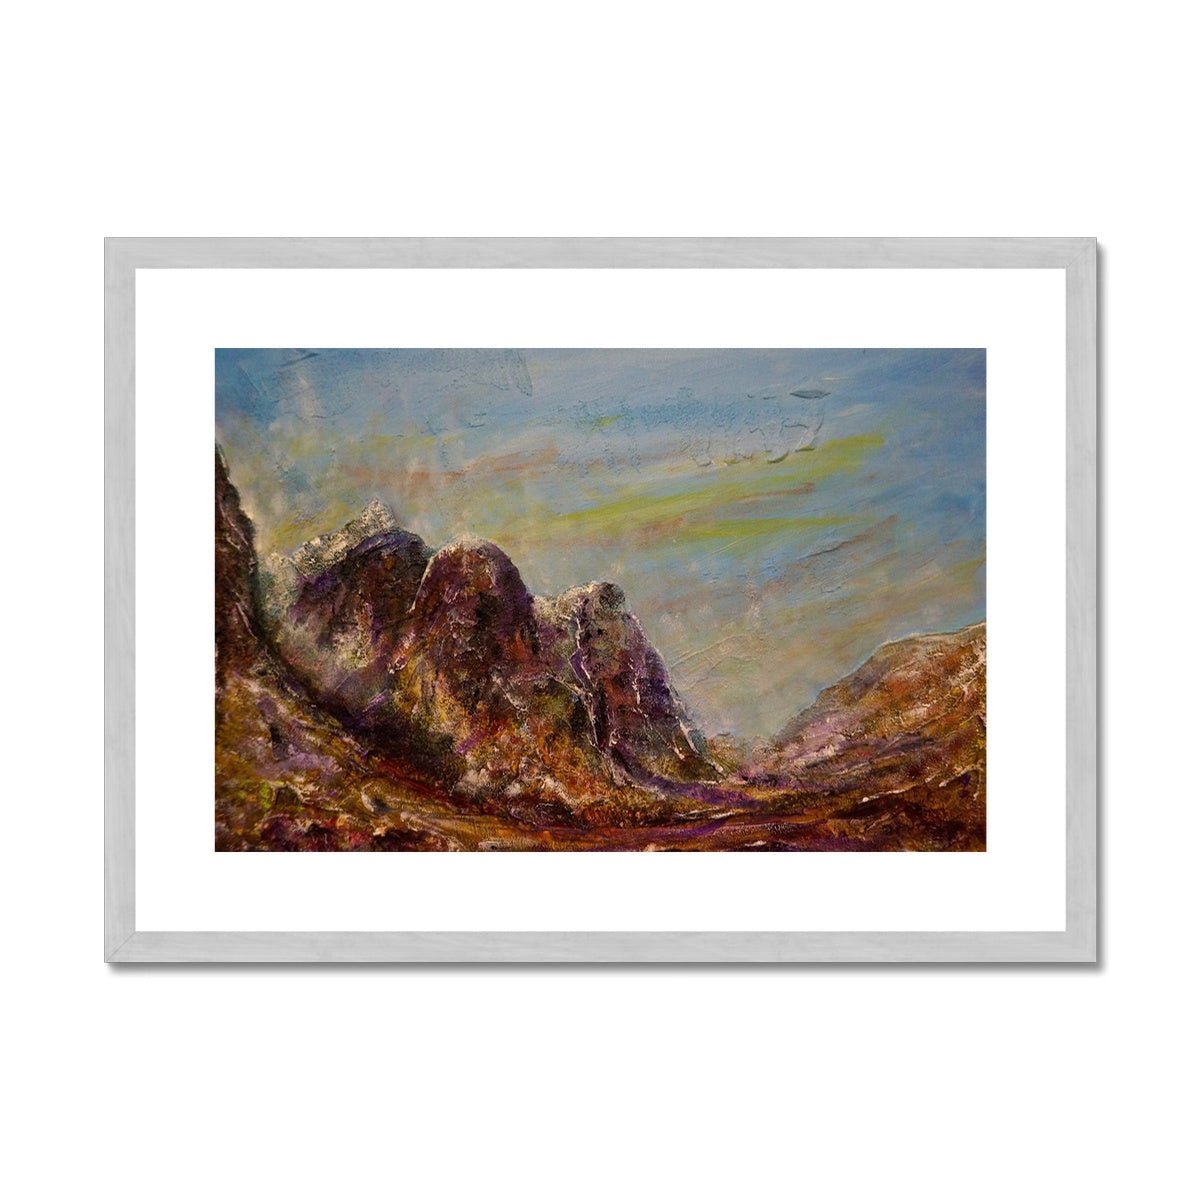 Three Sisters Glencoe Painting | Antique Framed & Mounted Prints From Scotland-Antique Framed & Mounted Prints-Glencoe Art Gallery-A2 Landscape-Silver Frame-Paintings, Prints, Homeware, Art Gifts From Scotland By Scottish Artist Kevin Hunter